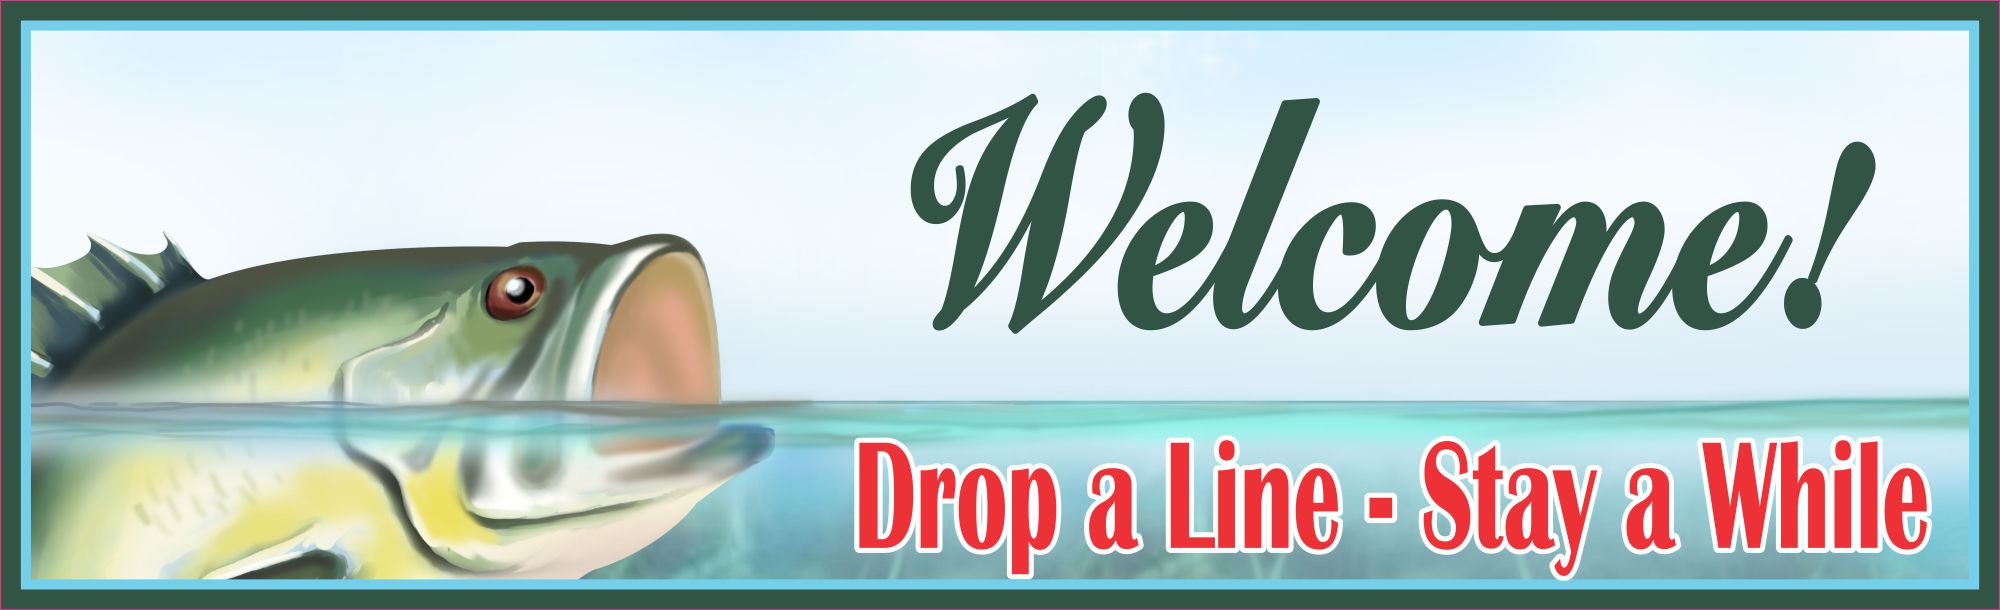 Drop a Line Fishing Welcome Sign: Blue Water, Green Fish, Dark Green Border  - Perfect Décor for Fishing Enthusiasts!